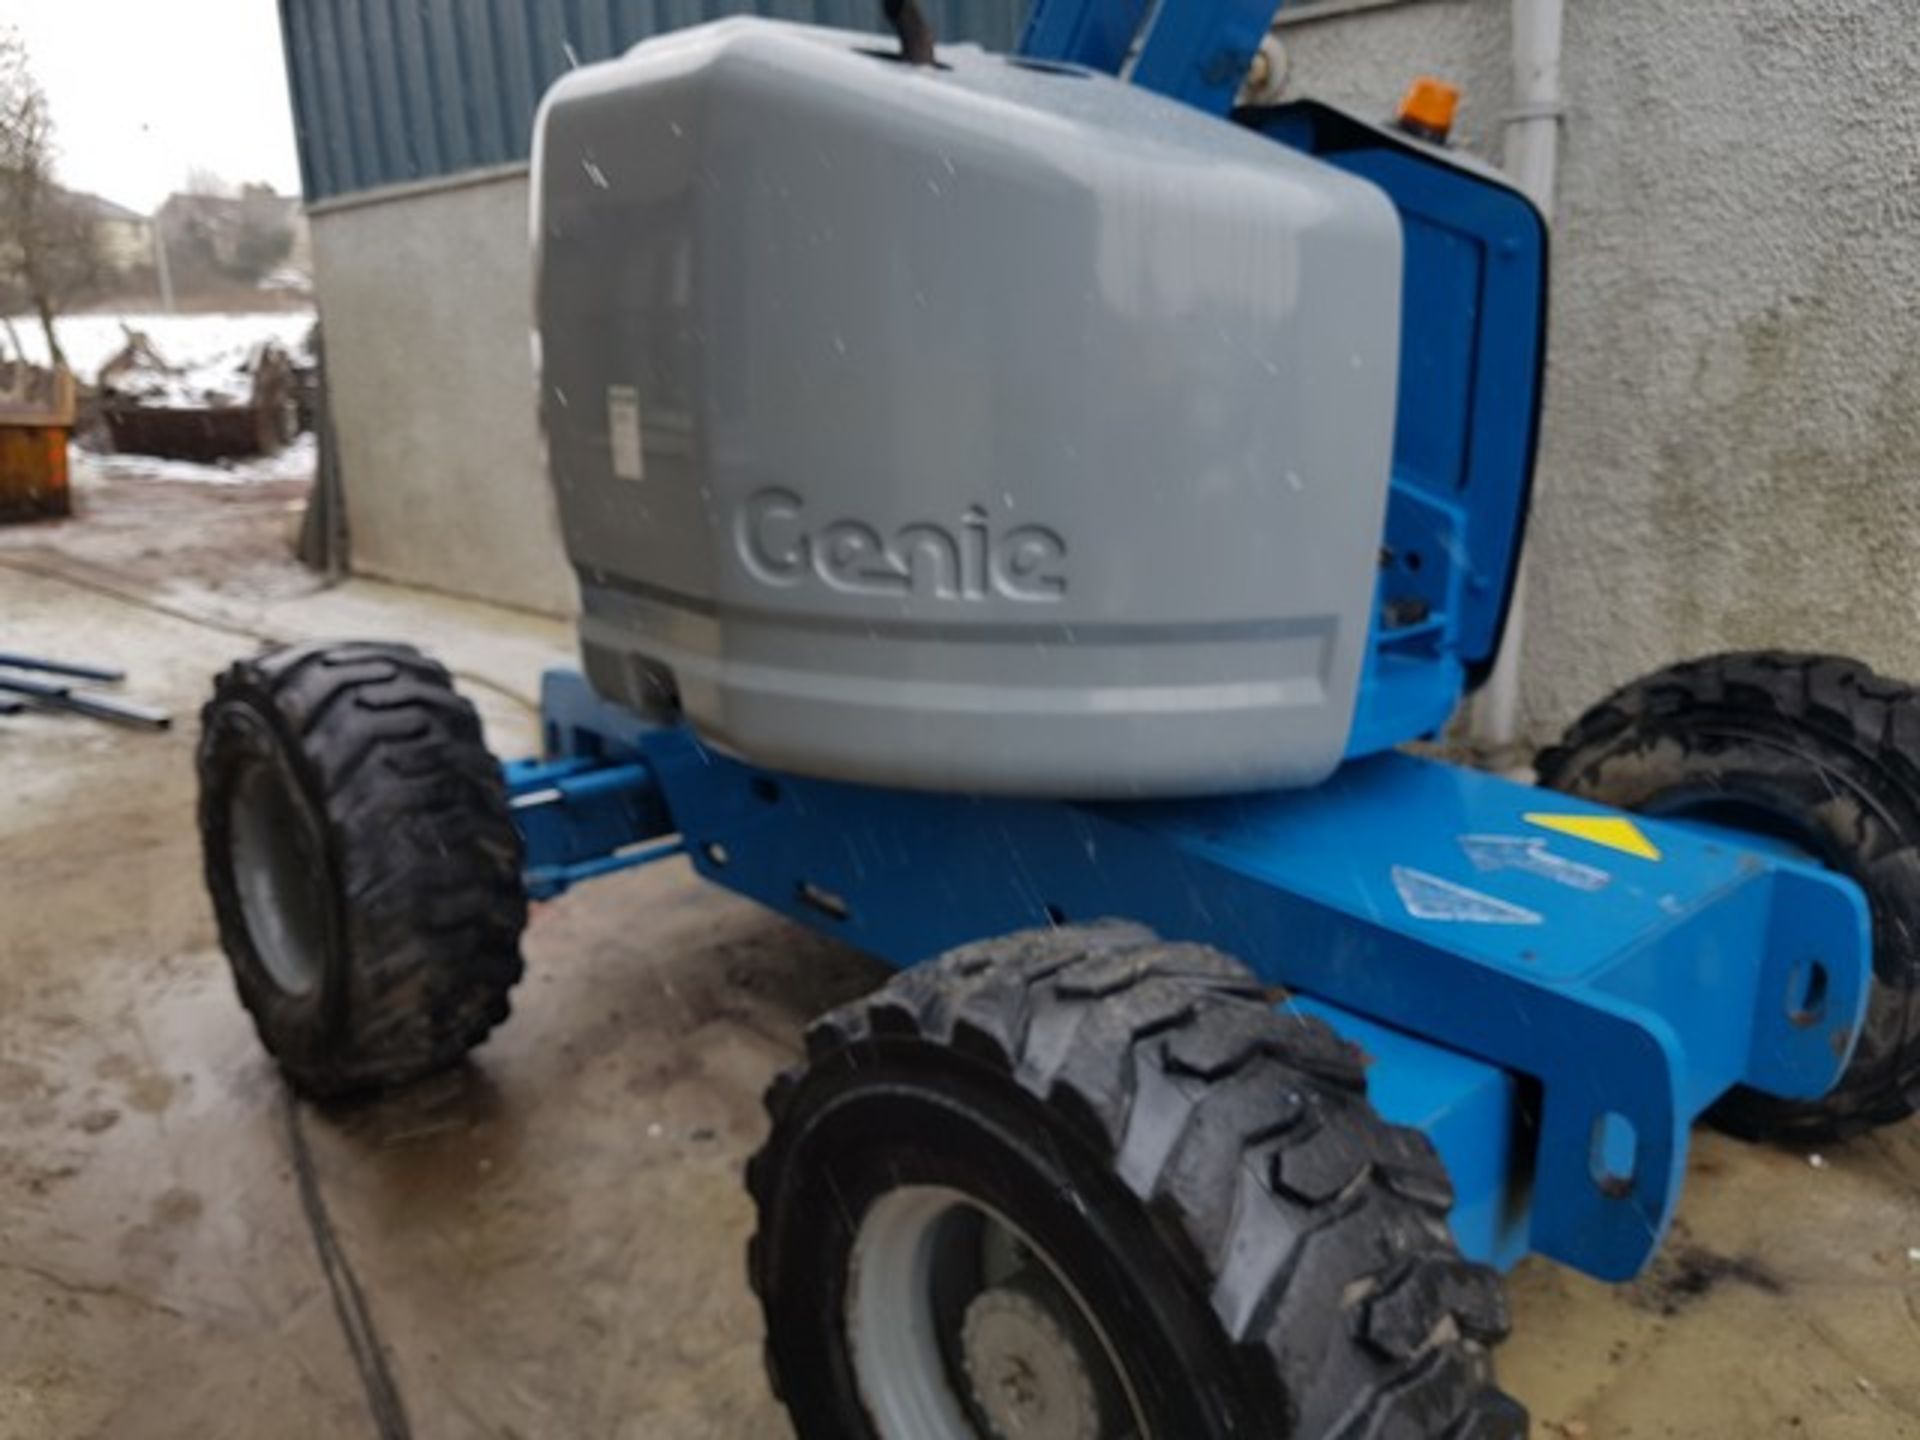 2000 GENIE MODEL Z45-25, S/N 15155, 8046HRS (NOT VERIFIED), LIFT CAPACITY - 230 - Image 10 of 17